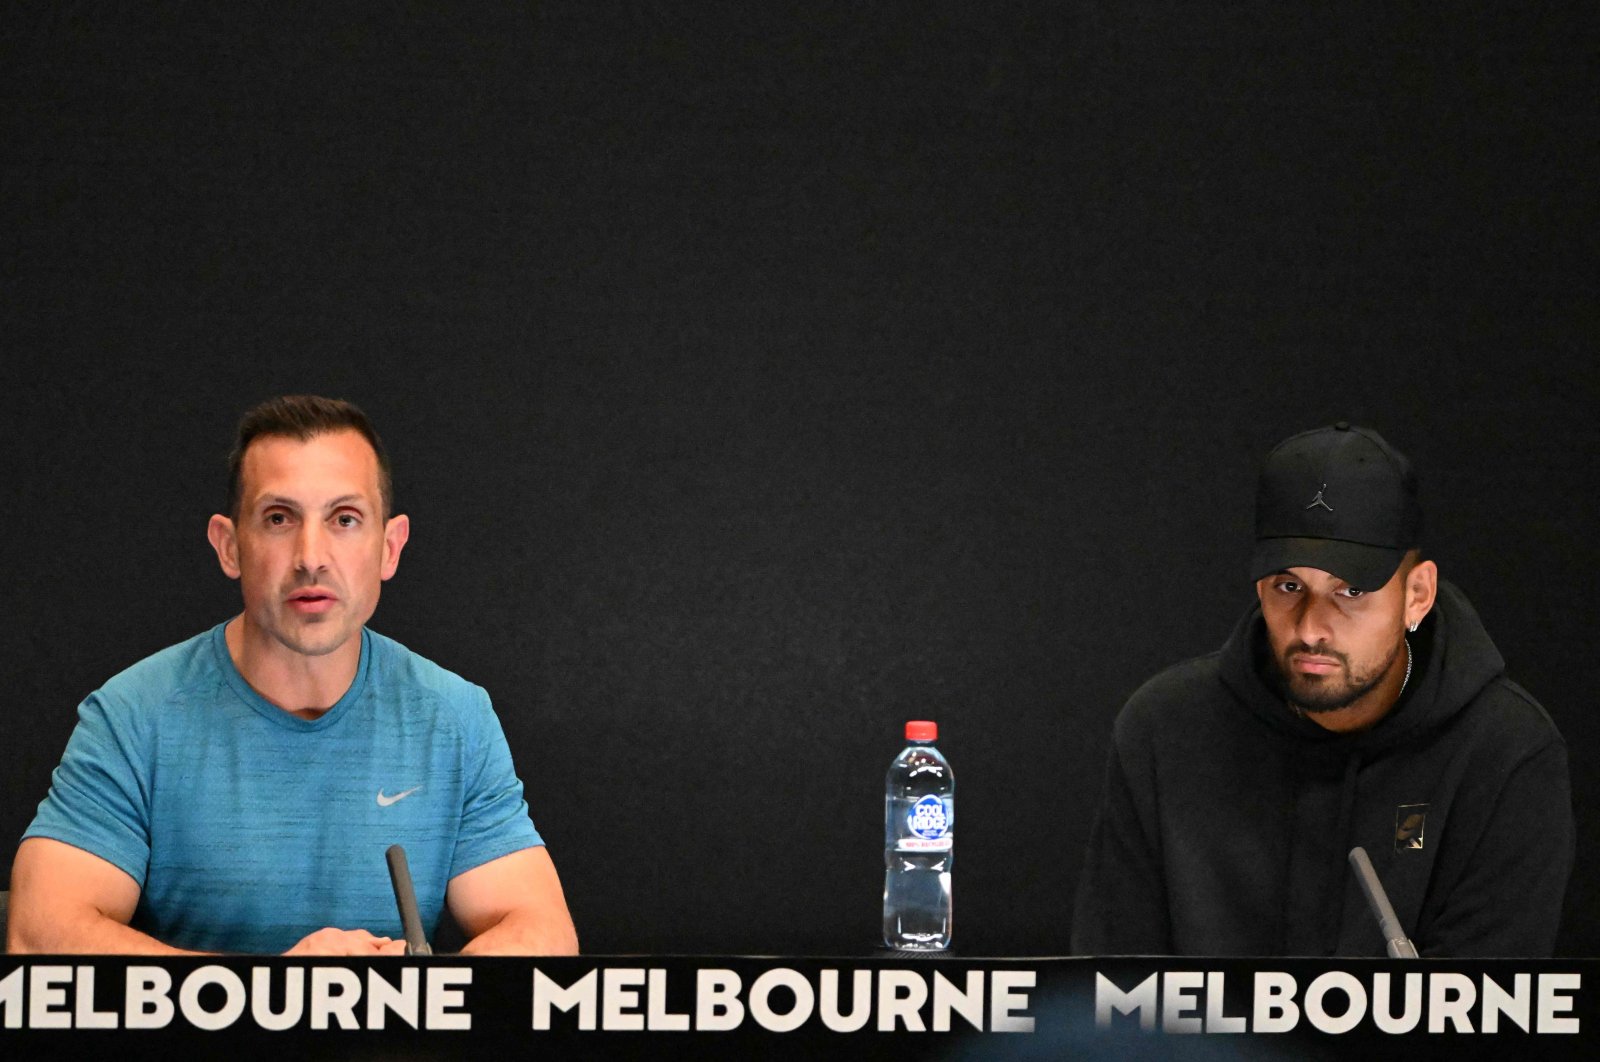 Australia&#039;s Nick Kyrgios (R) and his physio Will Maher attend a press conference on day one of the Australian Open tennis tournament, Melbourne, Australia, Jan. 16, 2023. (AFP Photo)